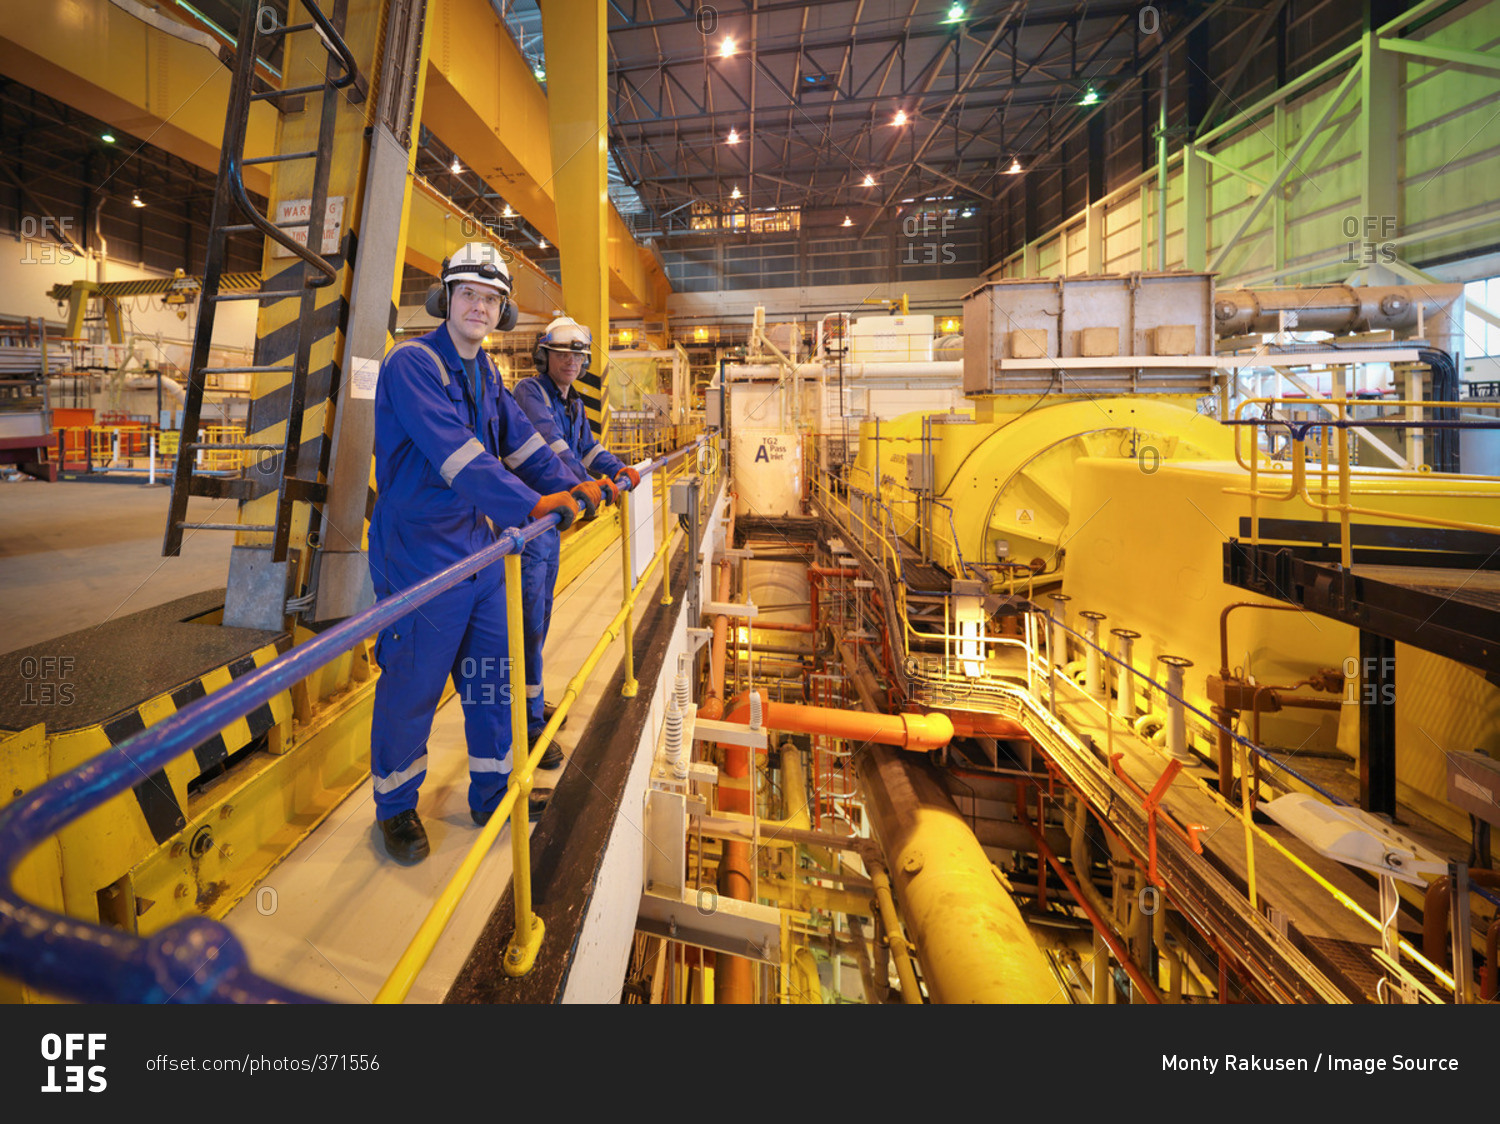 Portrait of workers in turbine hall of power station